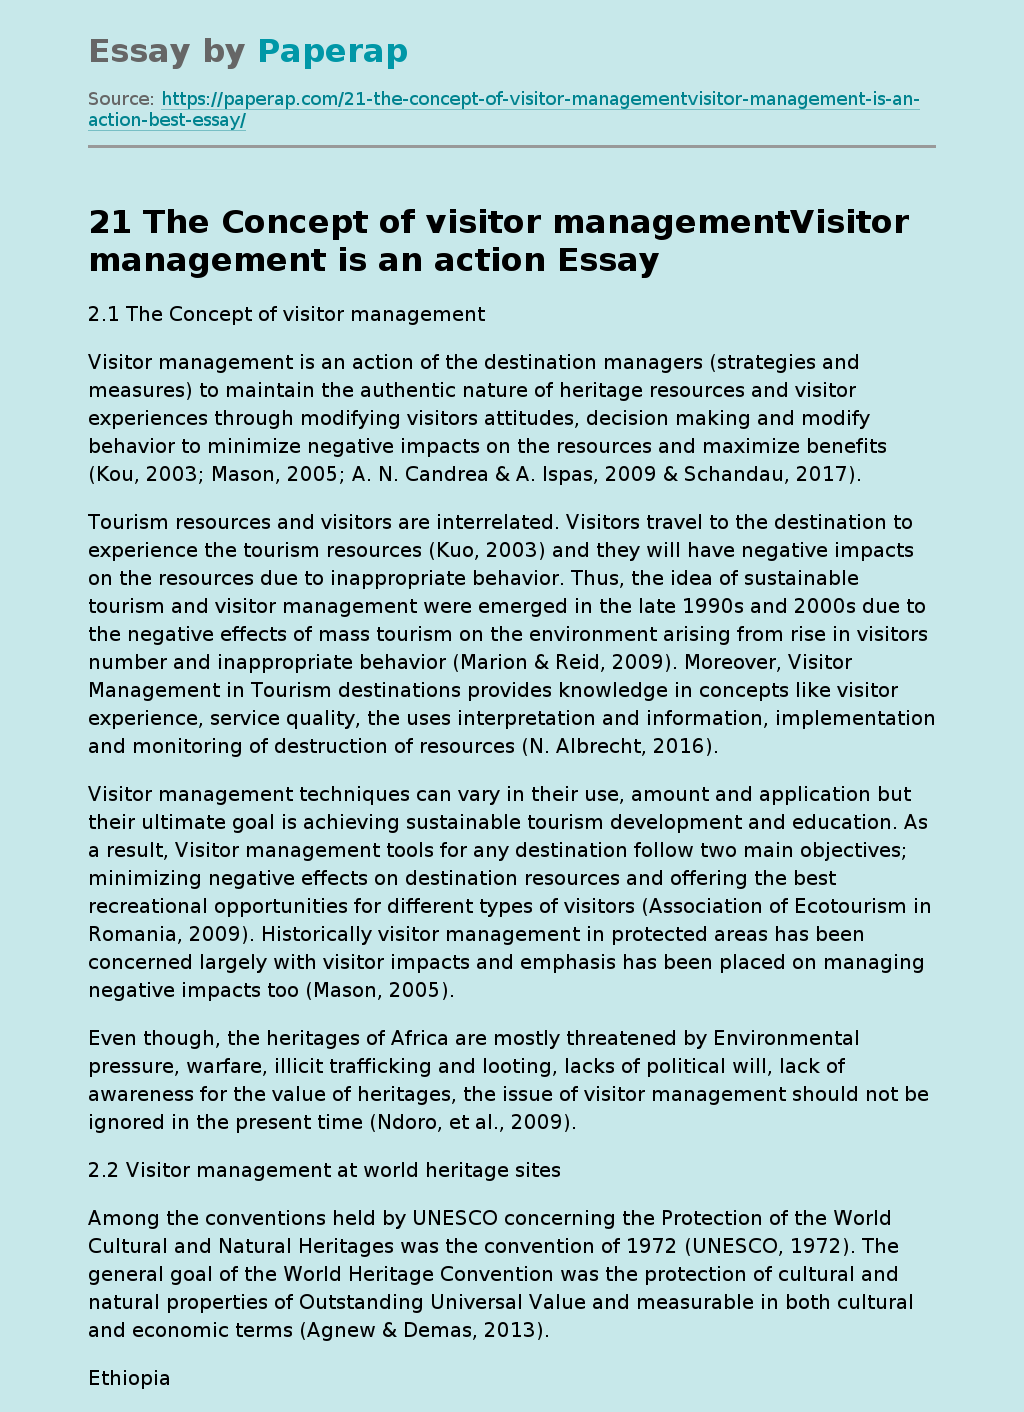 Visitor Management Is an Action